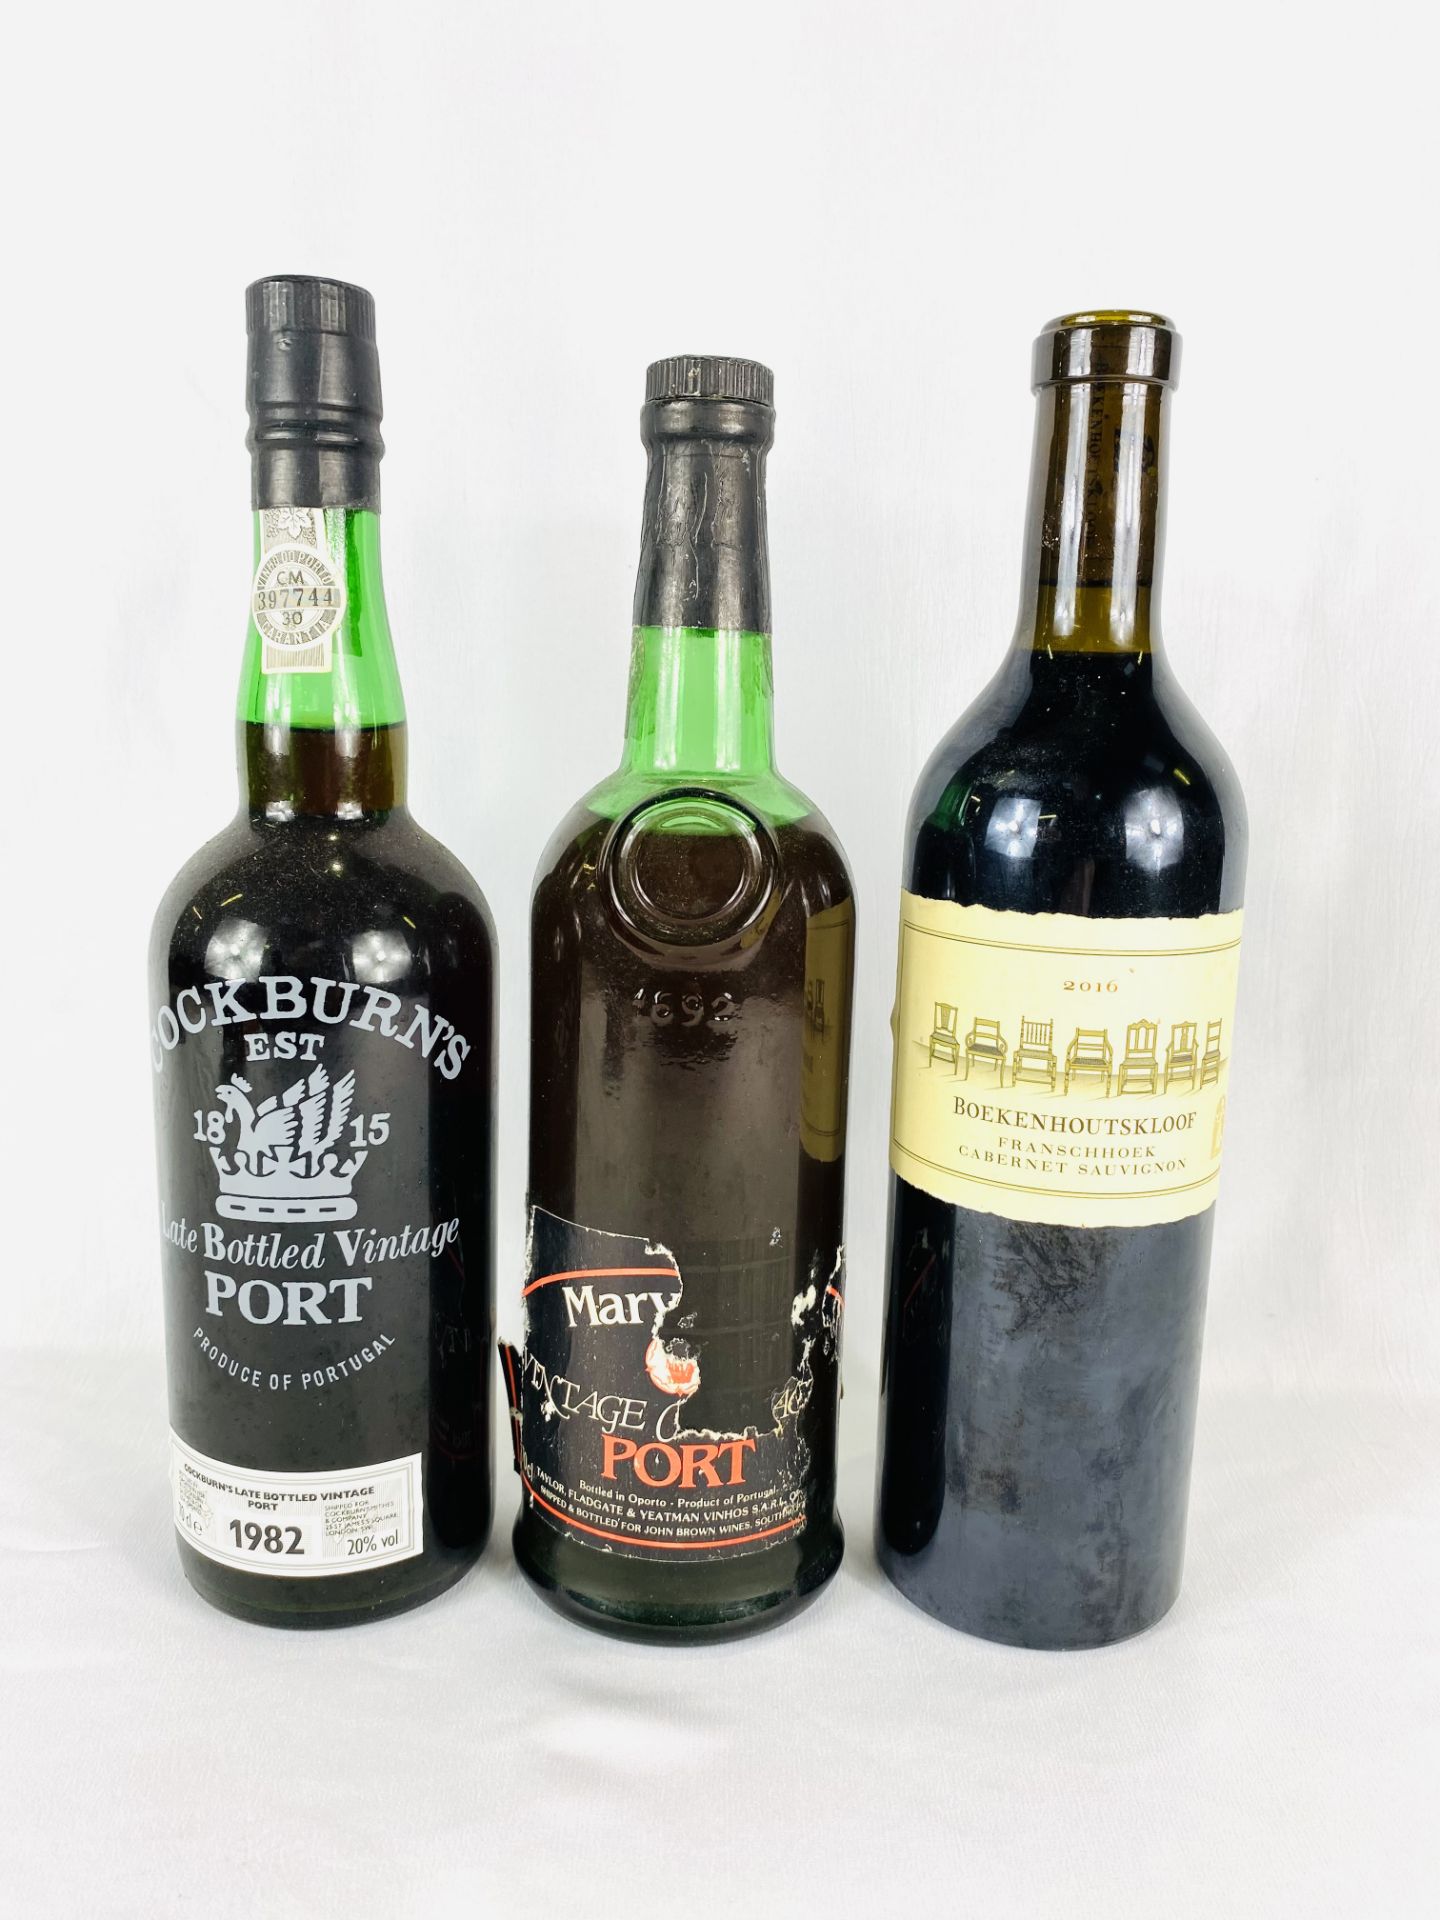 Two bottles of port together with a bottle of wine